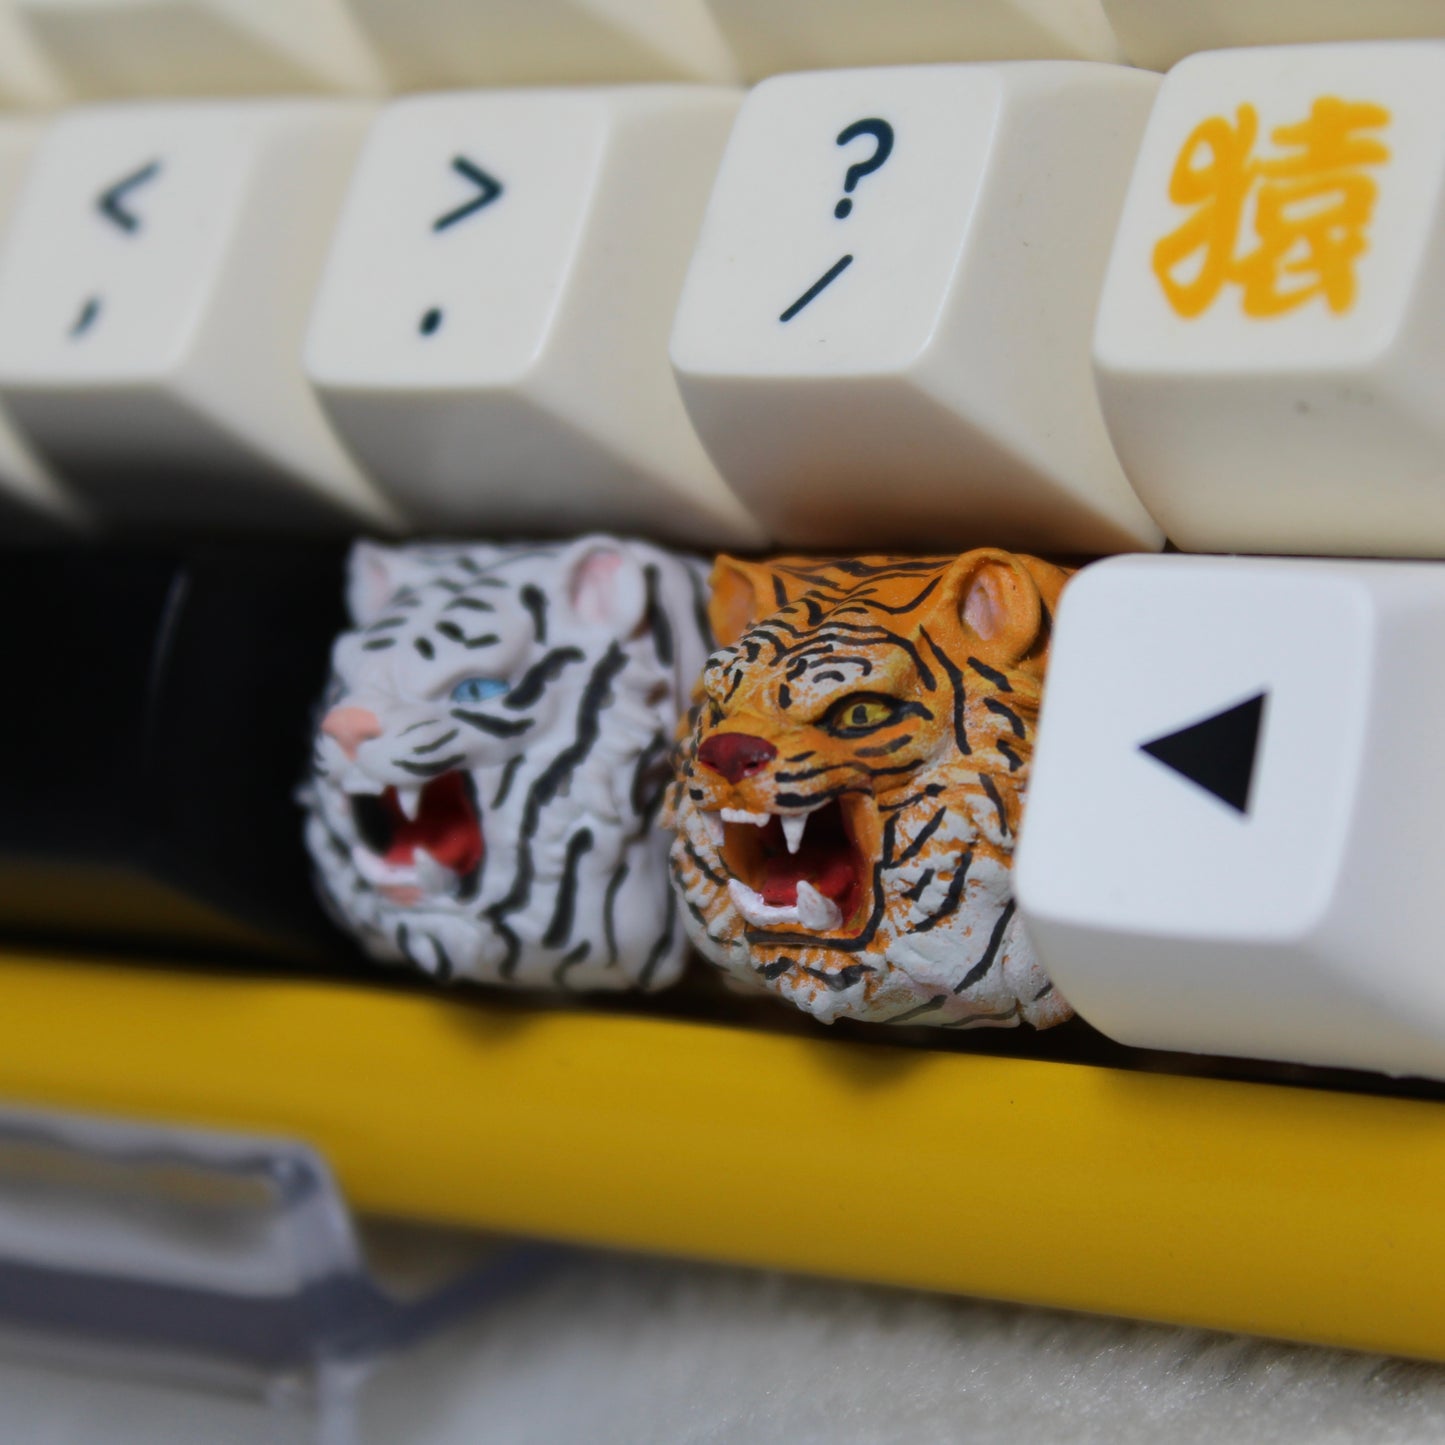 "Unleash the fierce allure of 'The Angry Tiger' with our Custom Artisan Keycap. Handcrafted with precision, this keycap features a captivating design inspired by the power and strength of a tiger. It's a bold statement piece that adds a touch of wild elegance to your keyboard. Elevate your setup with this unique and striking artisan keycap." 🐅🔥💻 #Keycaps #ArtisanKeycaps #TigerDesign